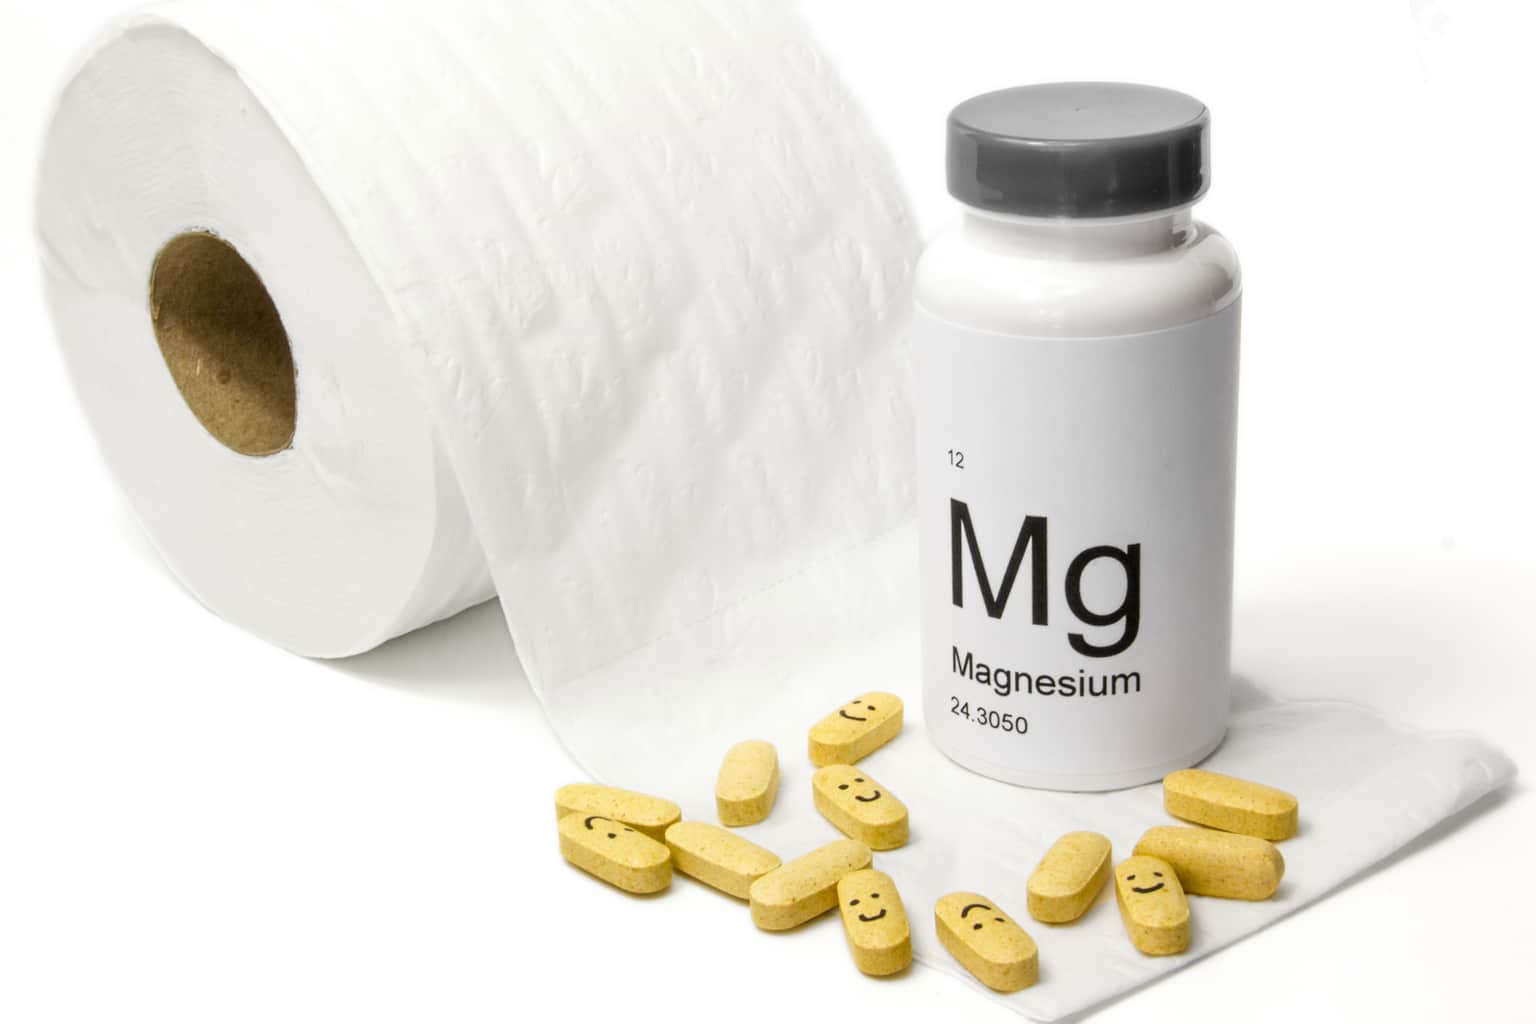 Hidden magnesium deficiency causes wrong diagnosis of heart problems